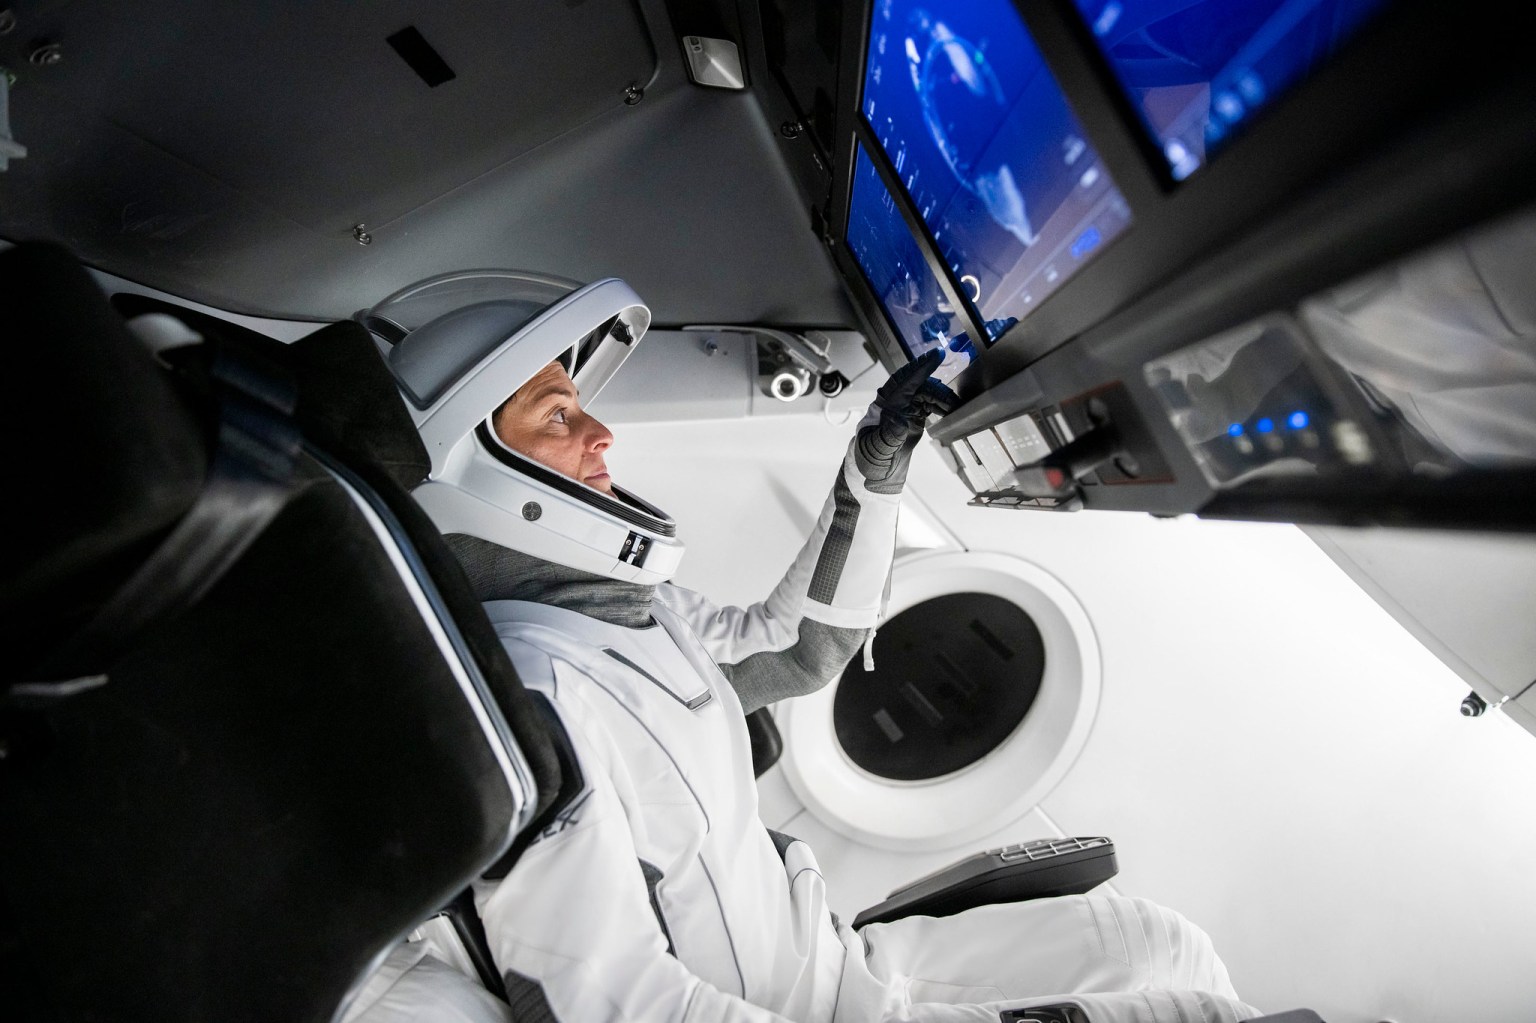 SpaceX Crew-5 Commander Nicole Aunapu Mann from NASA is pictured during a Crew Dragon cockpit training session at SpaceX headquarters in Hawthorne